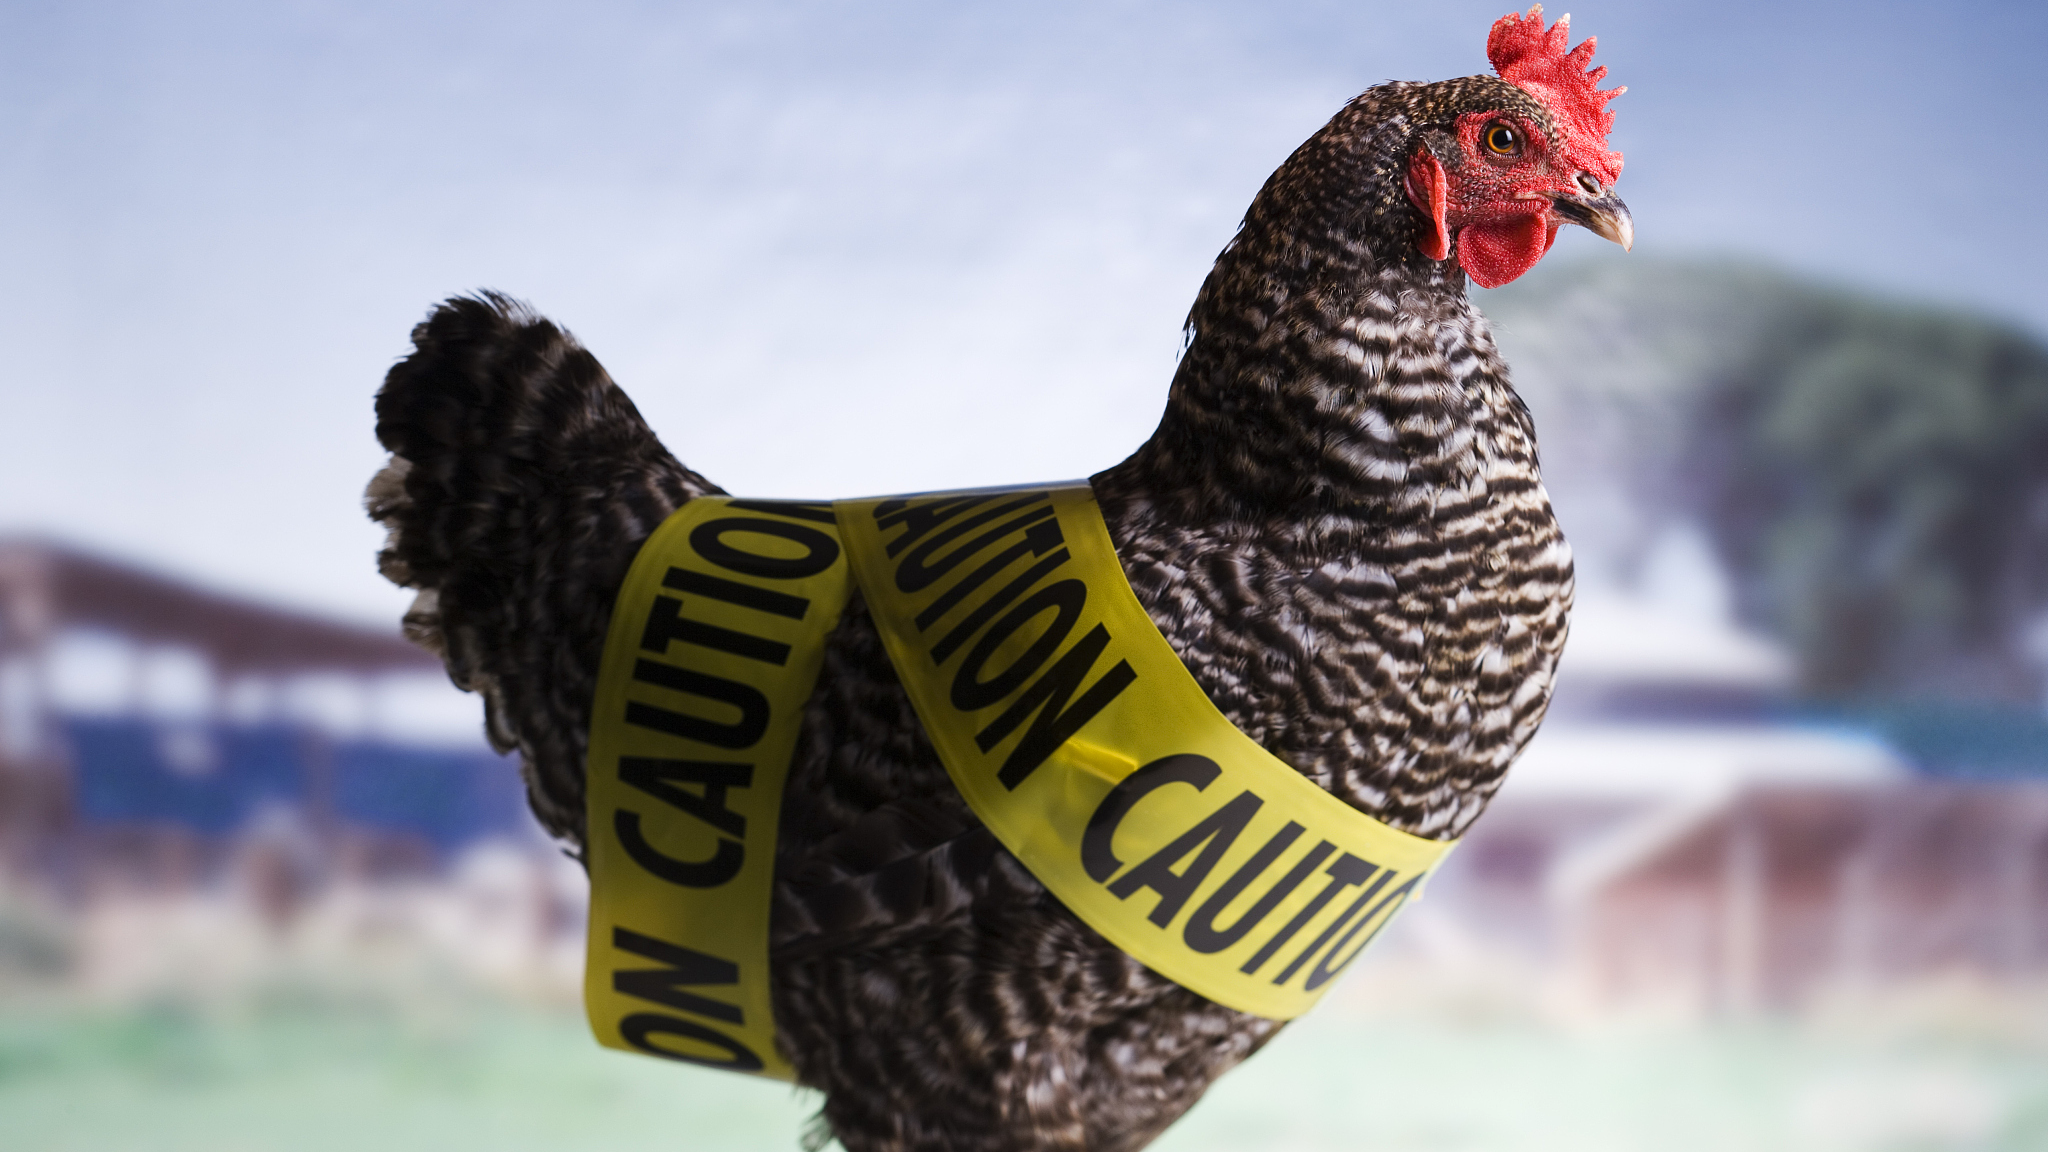 The outbreaks of avian influenza in Australian have prompte the culling of over 500,000 chickens so far. /CFP